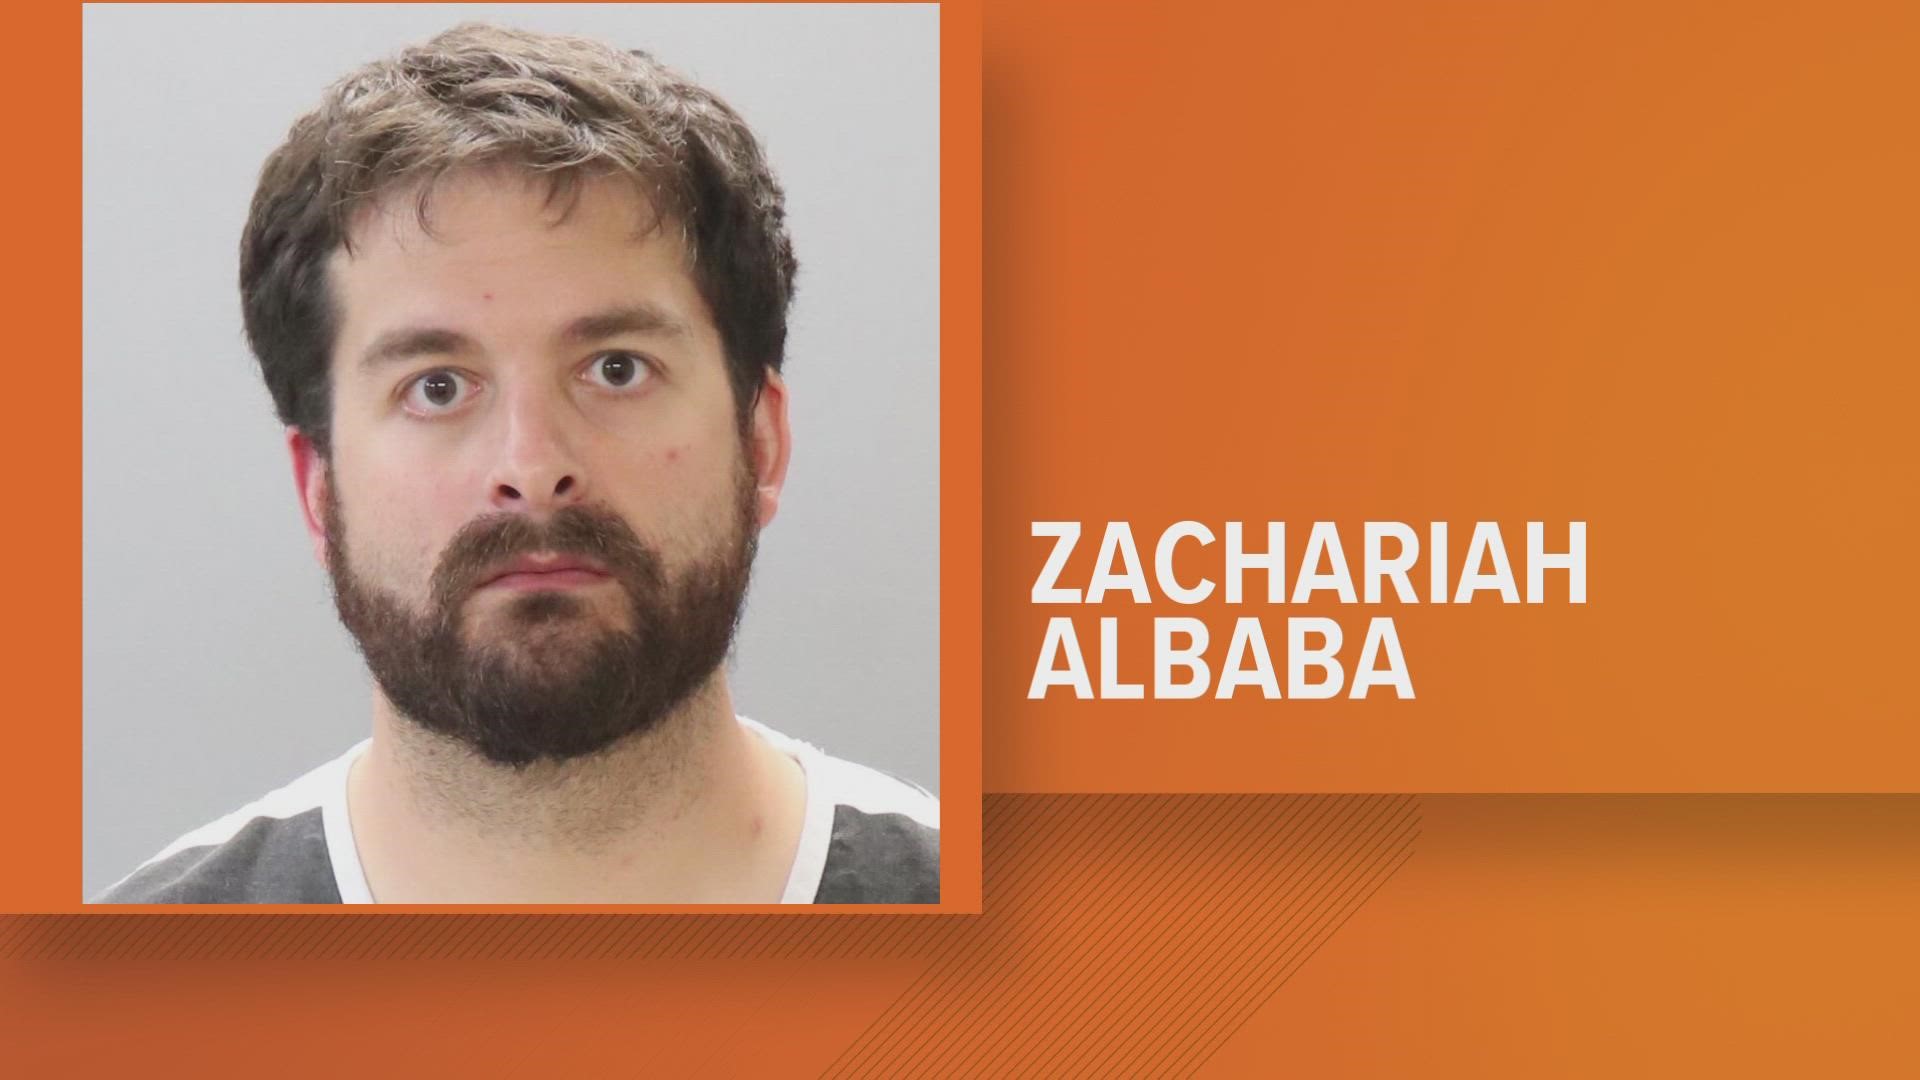 Albaba, a former KCS employee, was charged as a wanted felon out of Kentucky for procurement or promoting use of a minor by electronic means, according to KCSO.